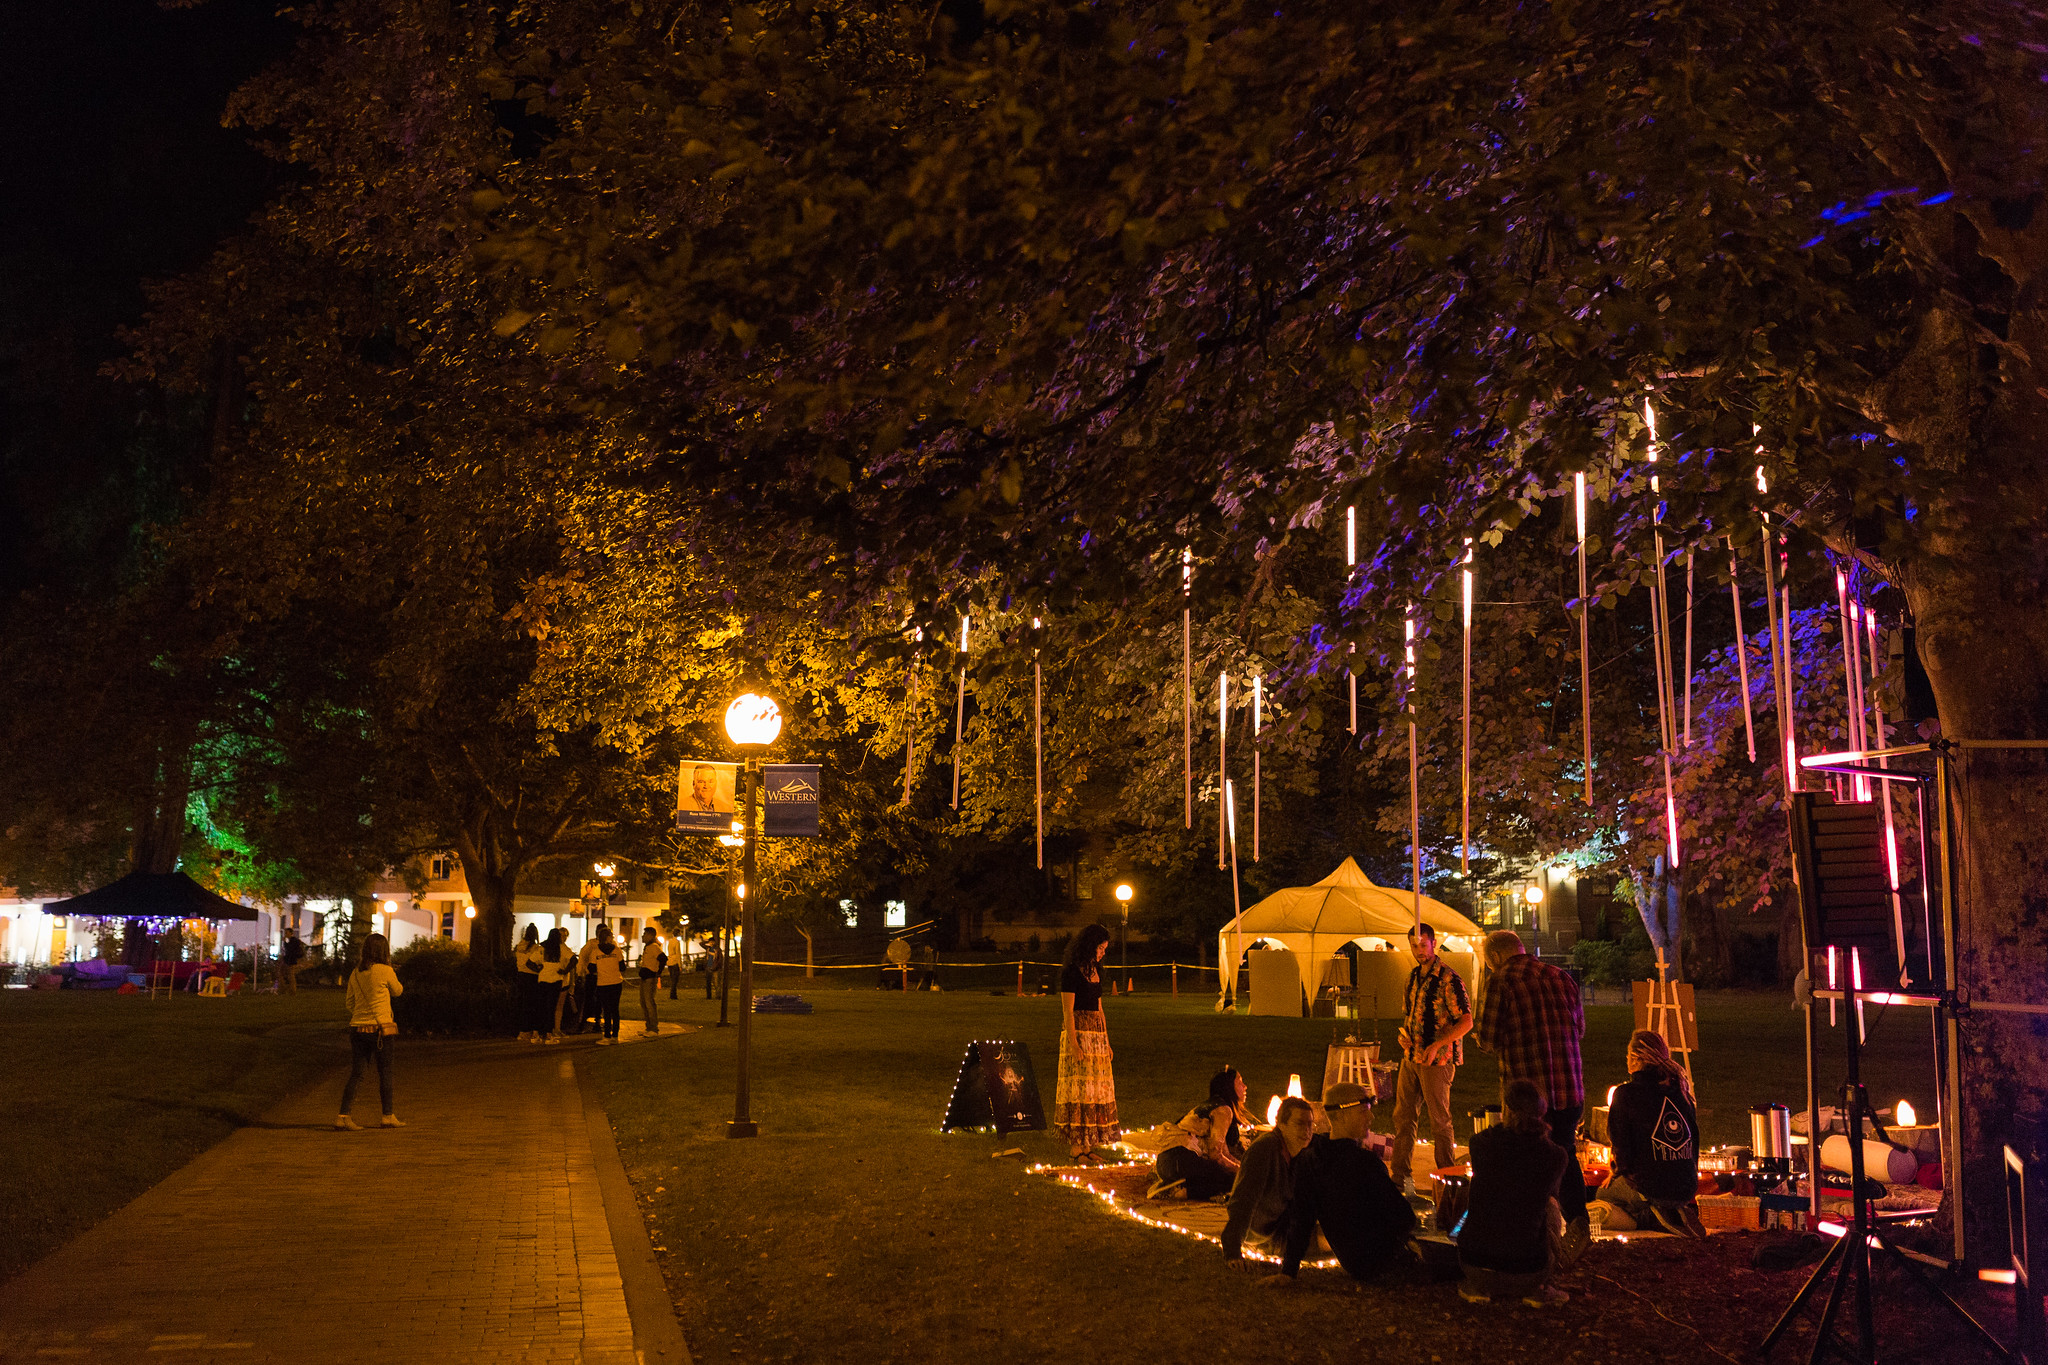 People gathered under lights in the Old Main lawn at night